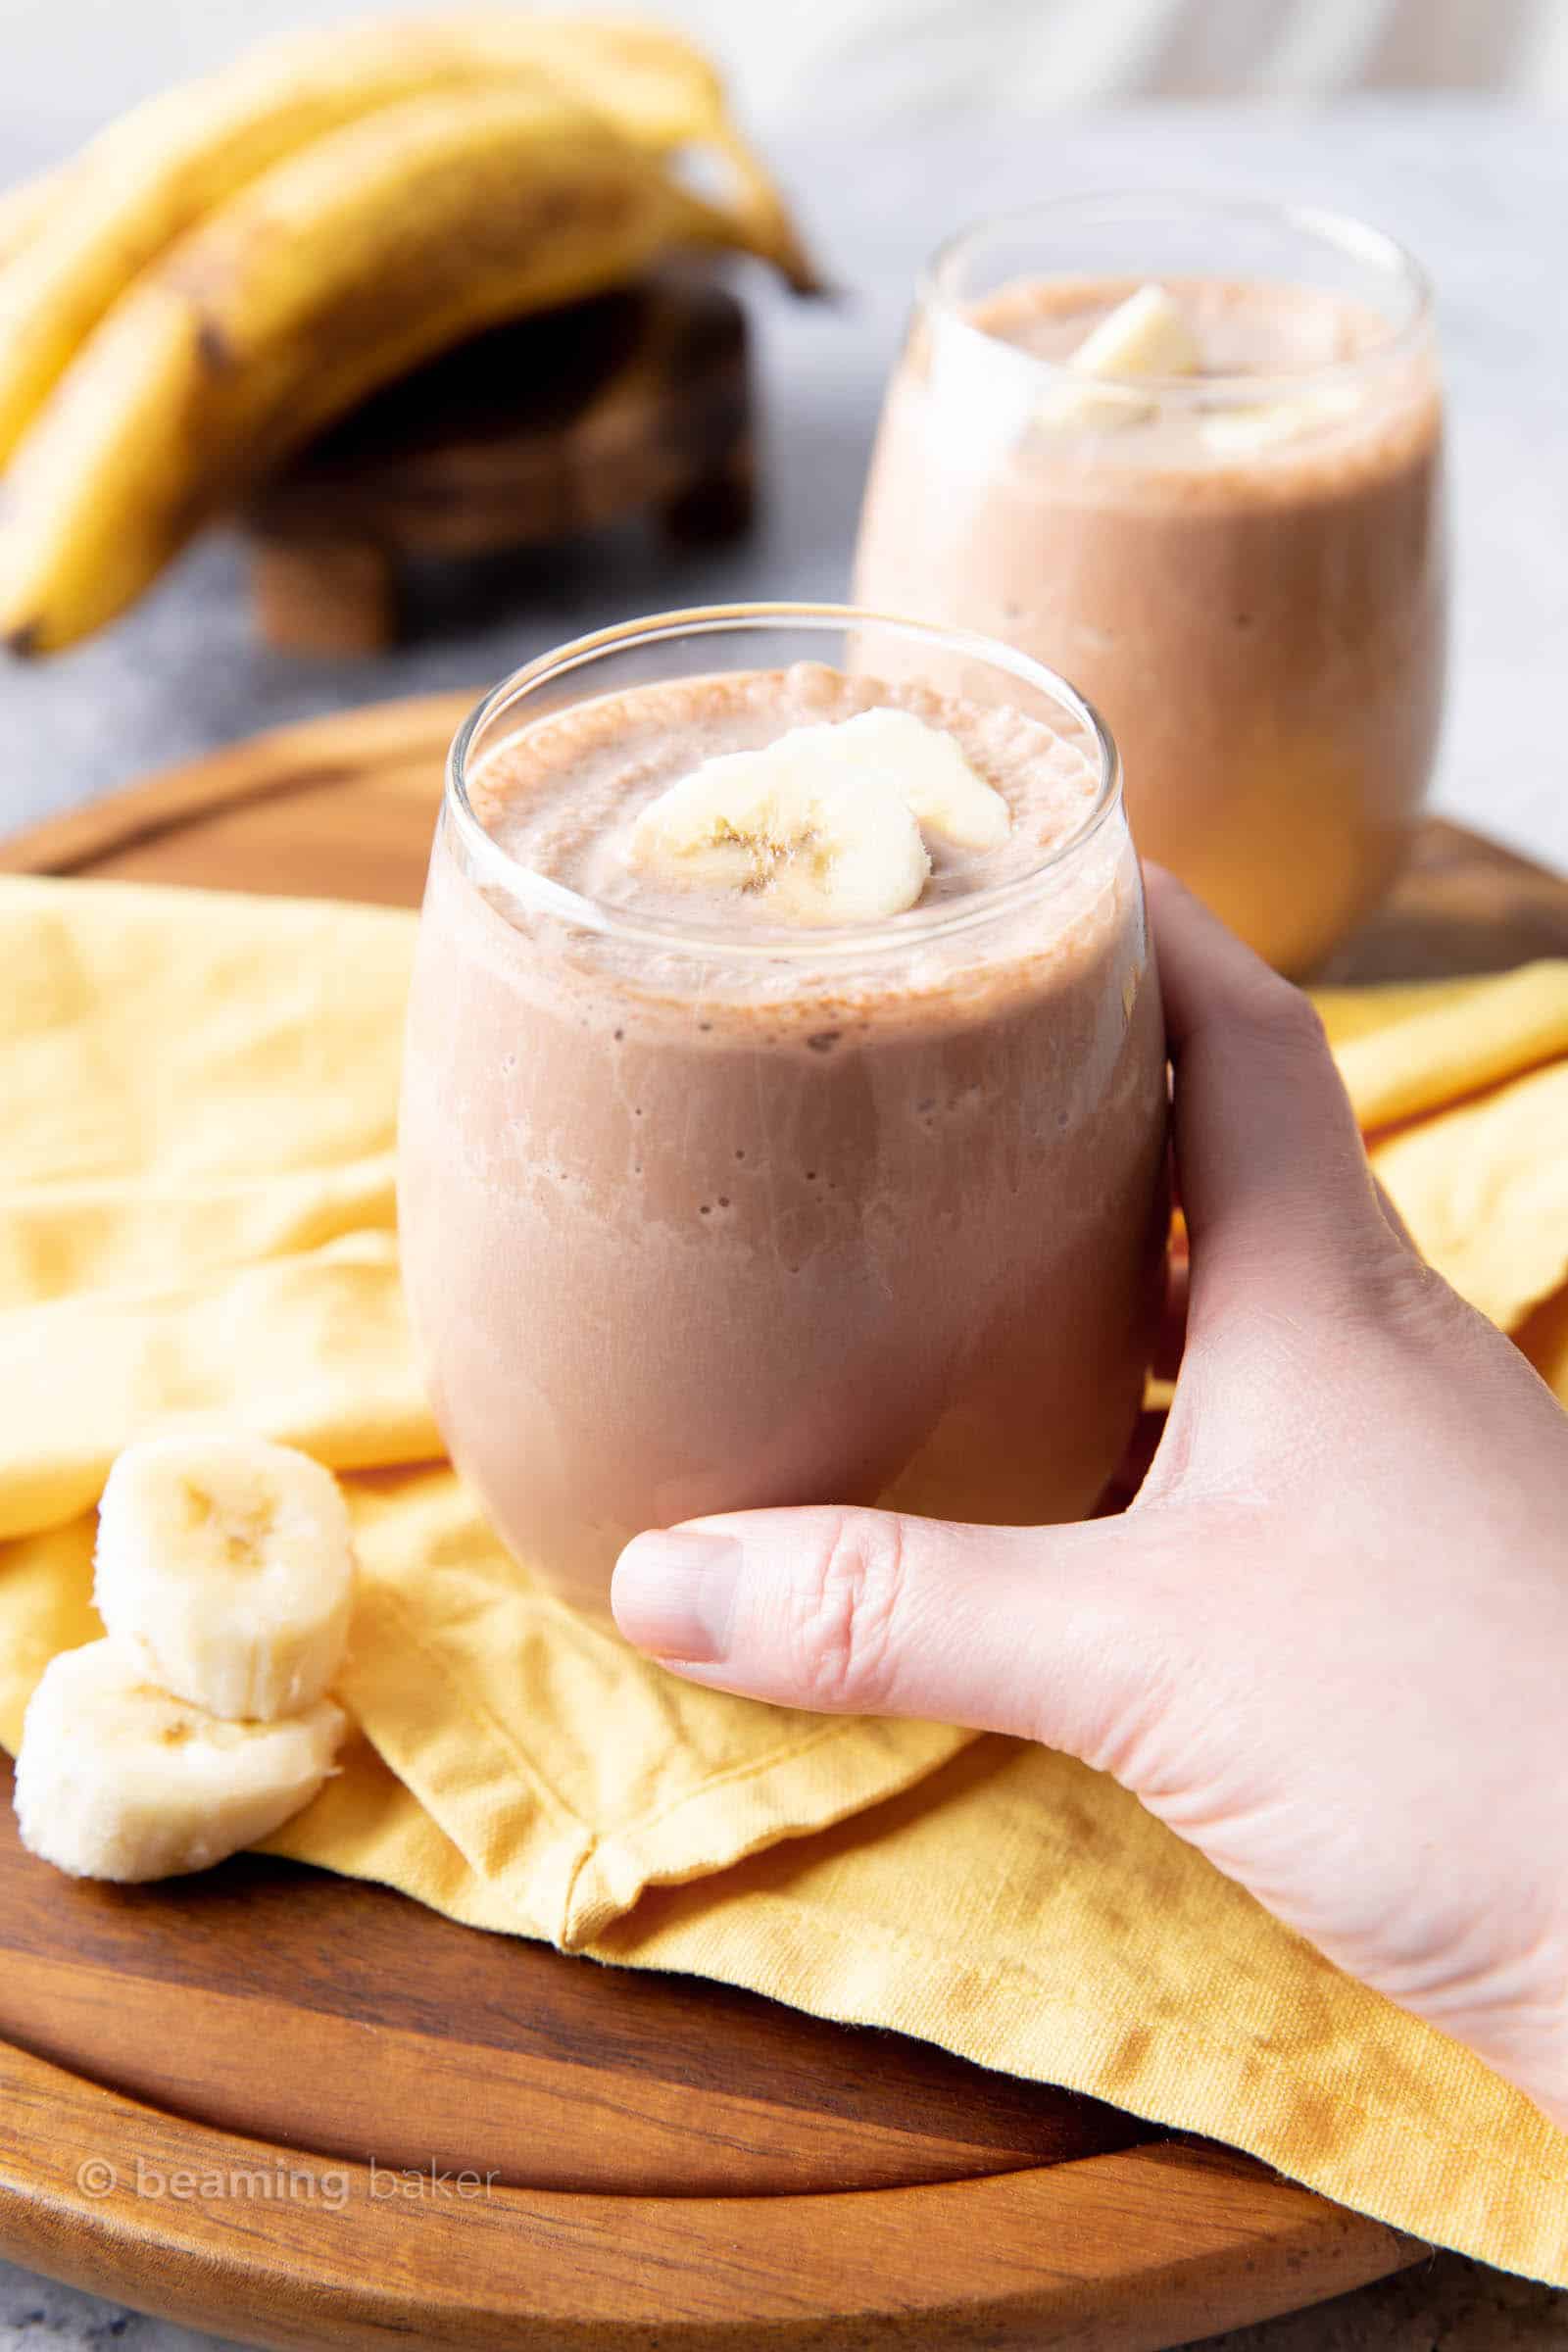 Chocolate Banana Vegan Protein Shake Recipe: creamy ‘n delicious chocolate banana protein shake made with just 4 ingredients. 22 grams of plant-based protein in the best vegan protein shake recipe! #Vegan #Chocolate #Banana #Protein #Shake | Recipe at BeamingBaker.com